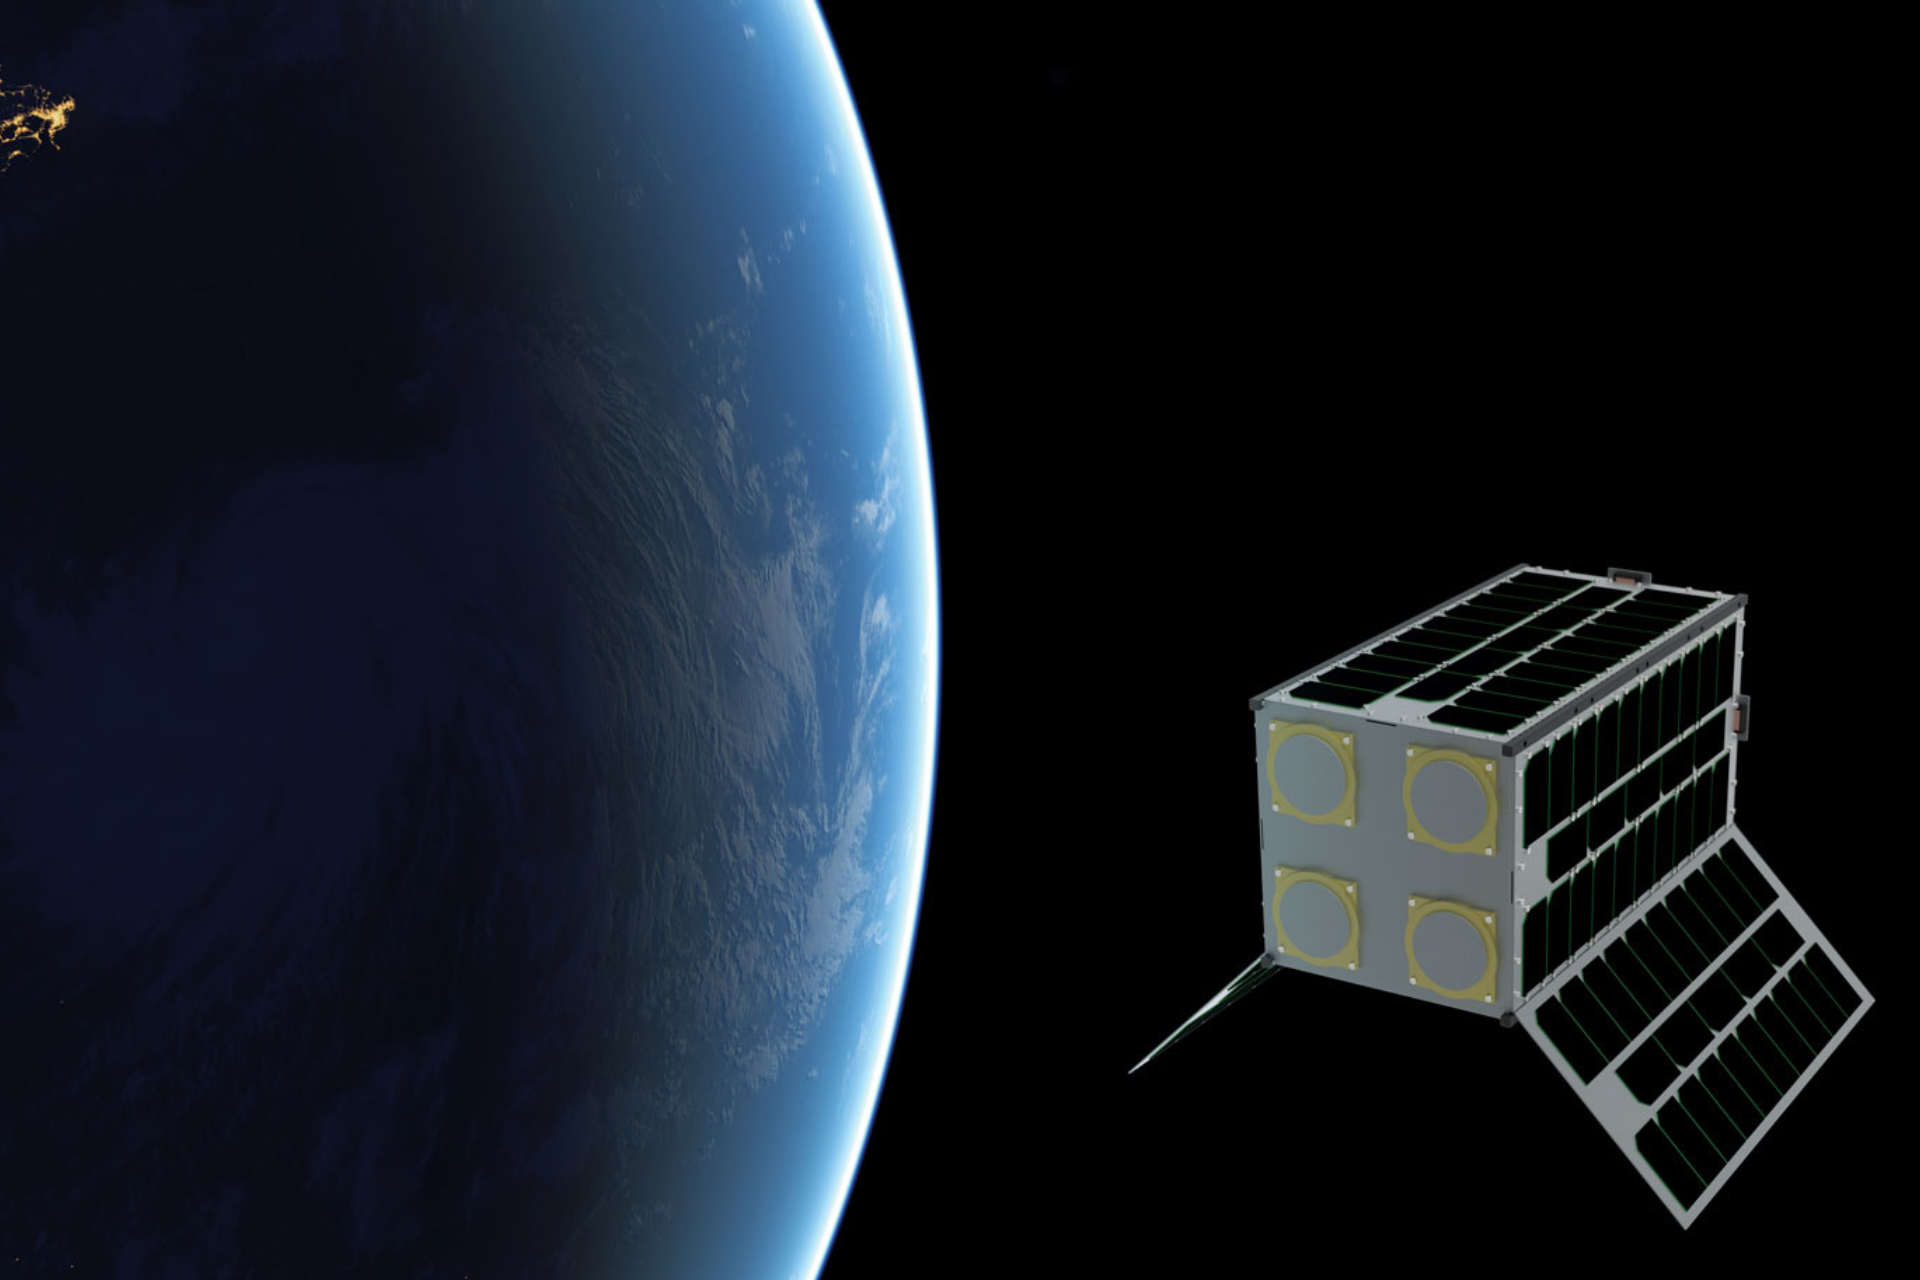 A model of a satelight